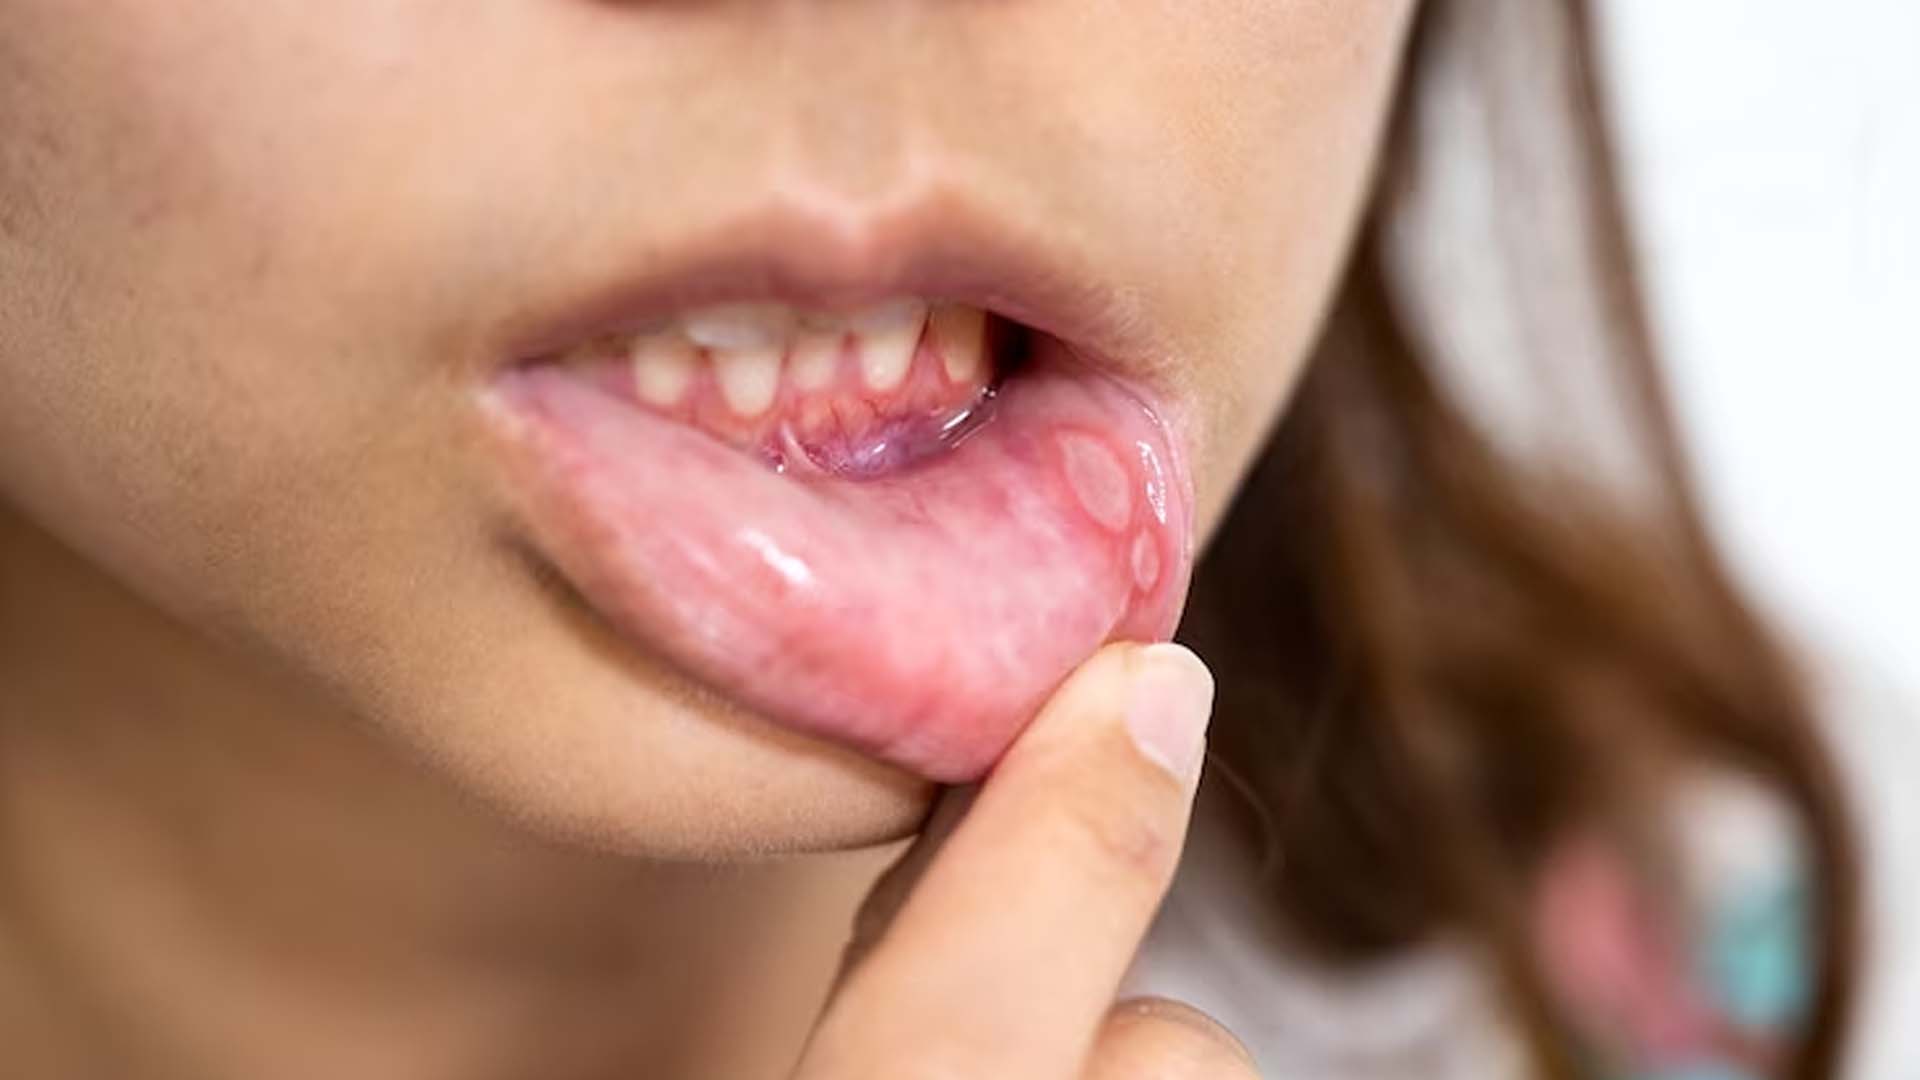 Canker sores or Mouth Ulcers